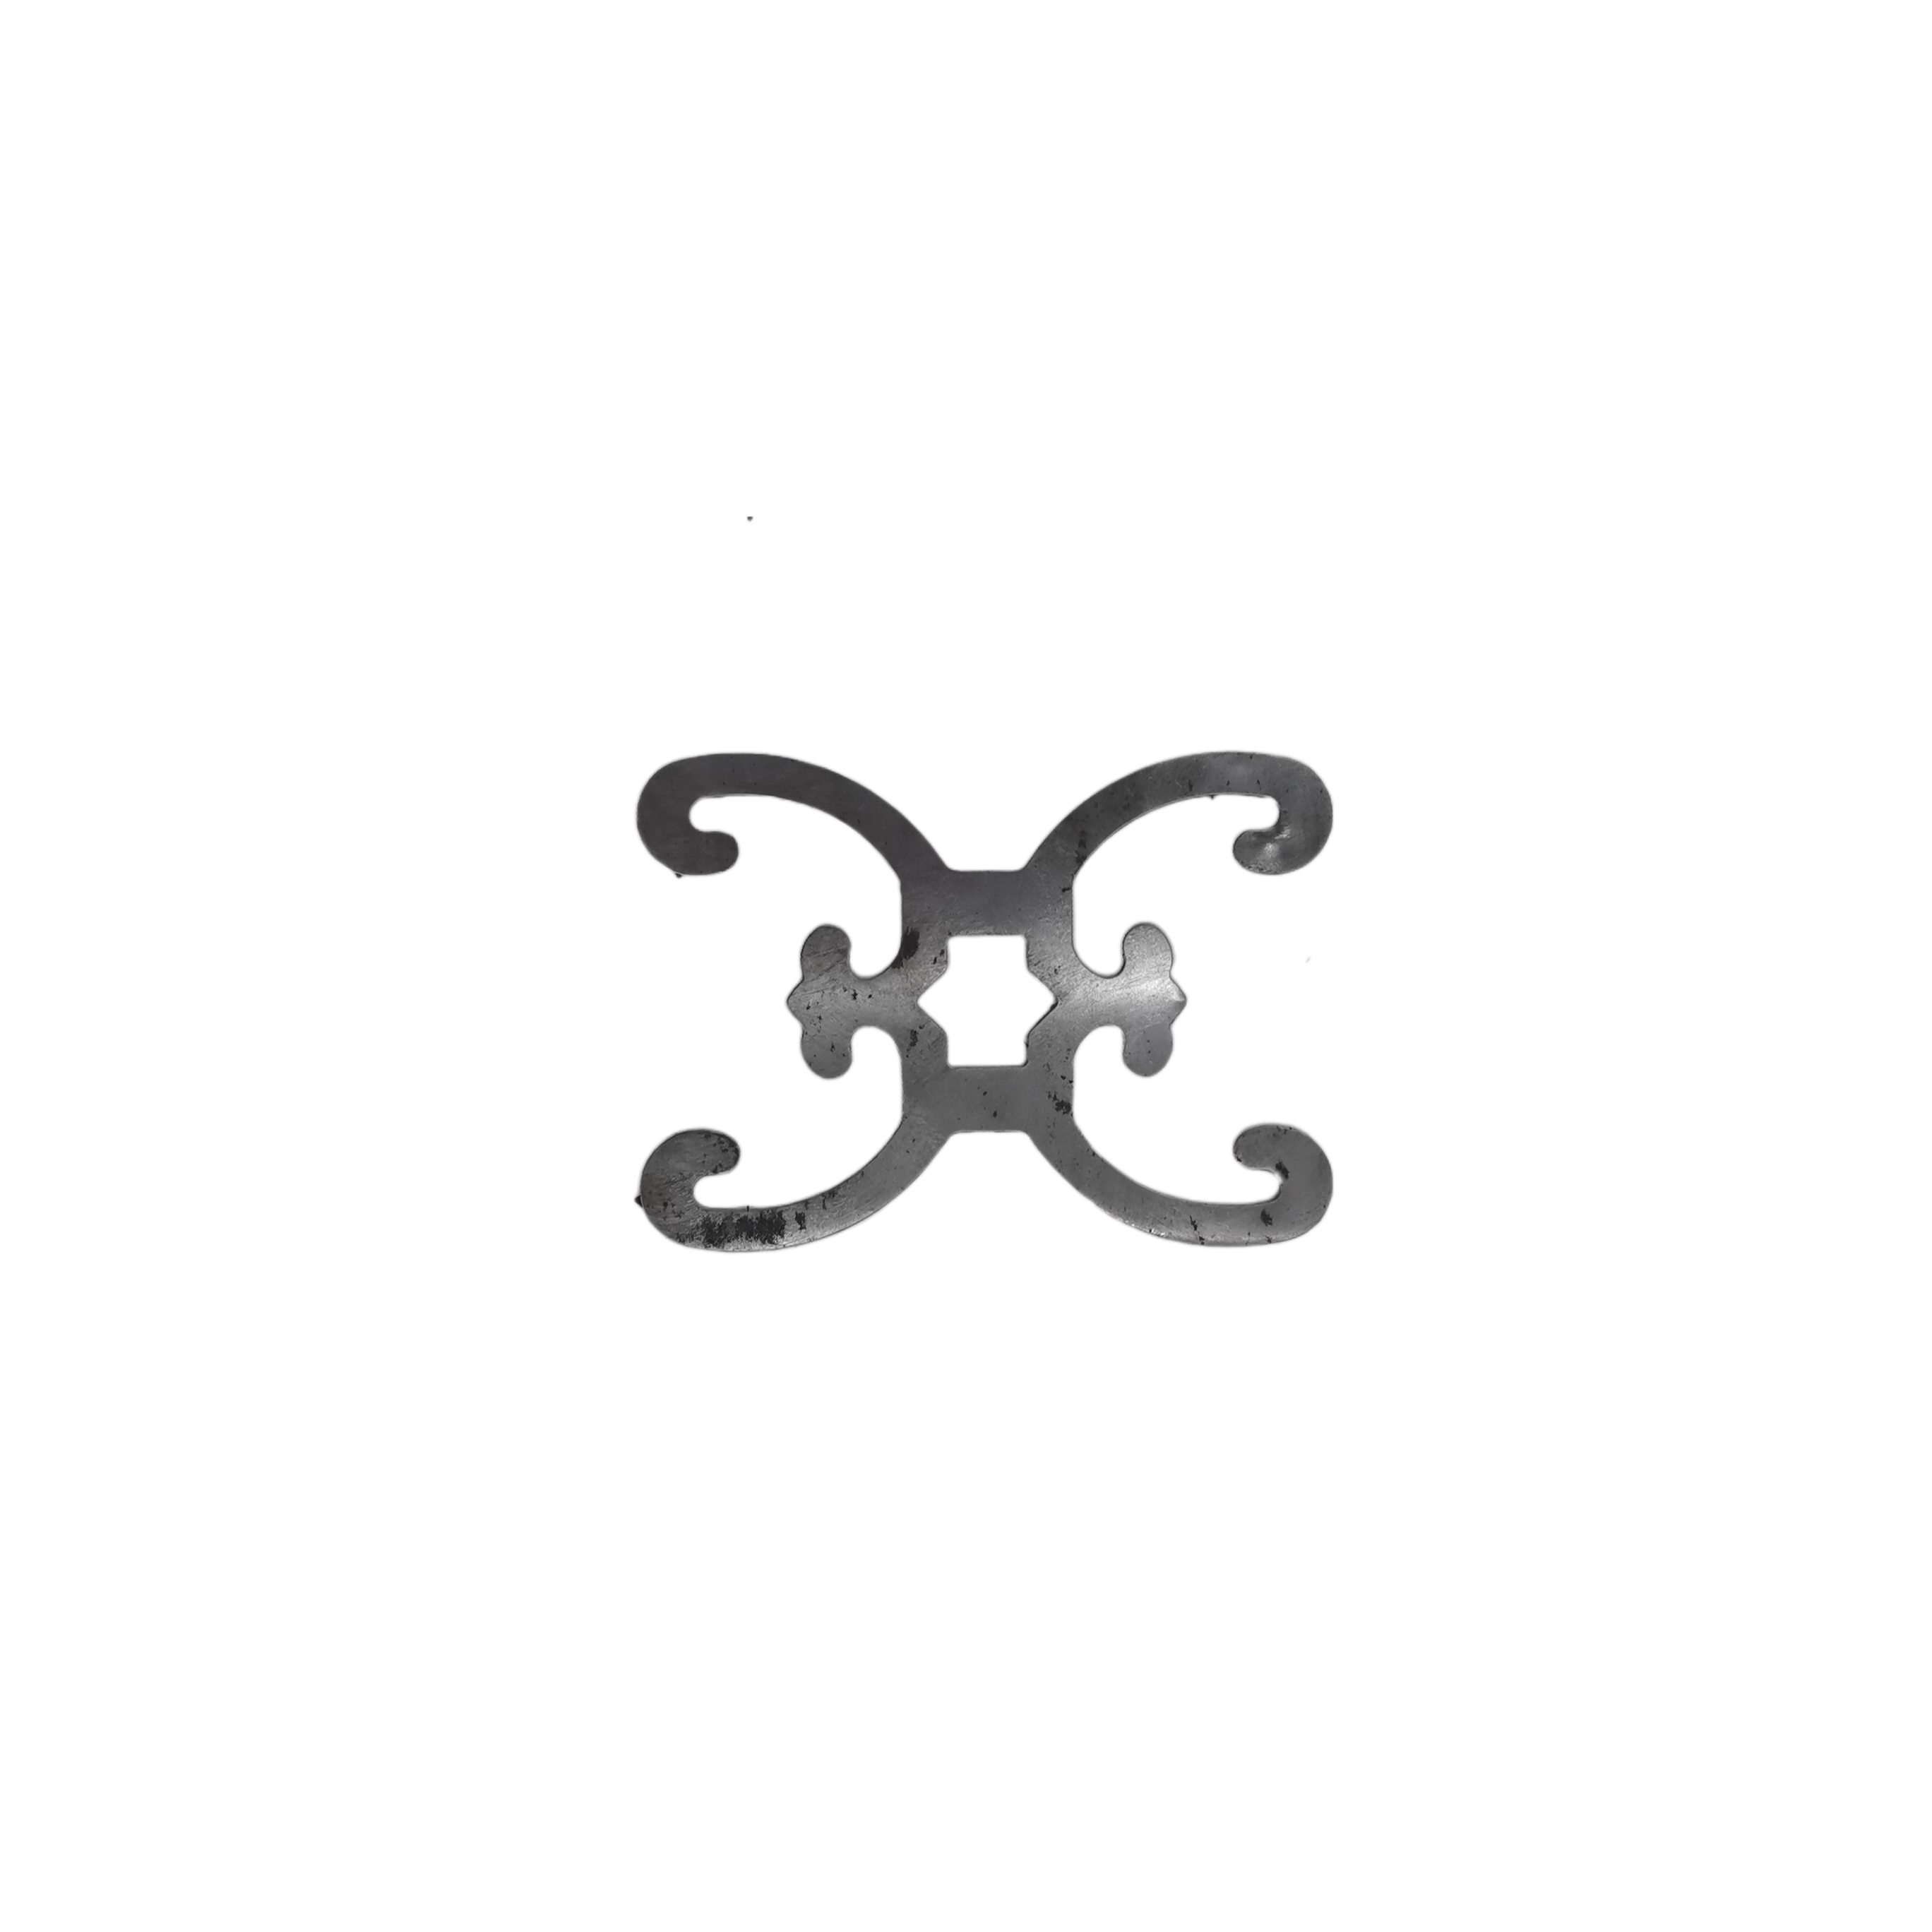 DECORATIVE WROUGHT IRON STAMPING/CODE:9117